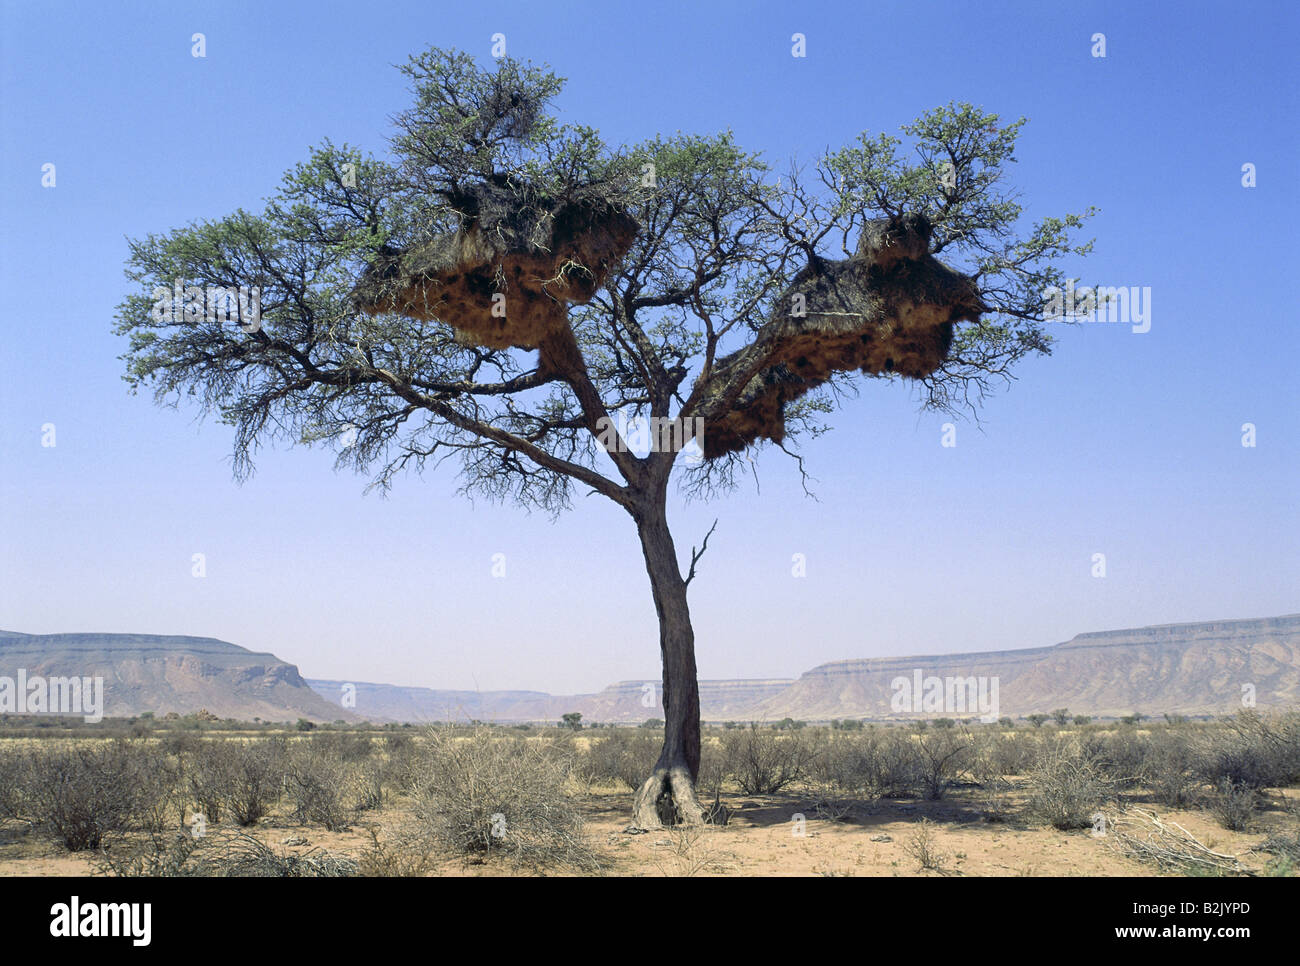 Zoologie/Tiere, Vogel/Vogel, Widowbirds, (Ploceidae), Baum mit Nester, Namib-Naukluft Park, Namibia, Verbreitung: Afrika, Australien, Europa, Asien, Additional-Rights - Clearance-Info - Not-Available Stockfoto